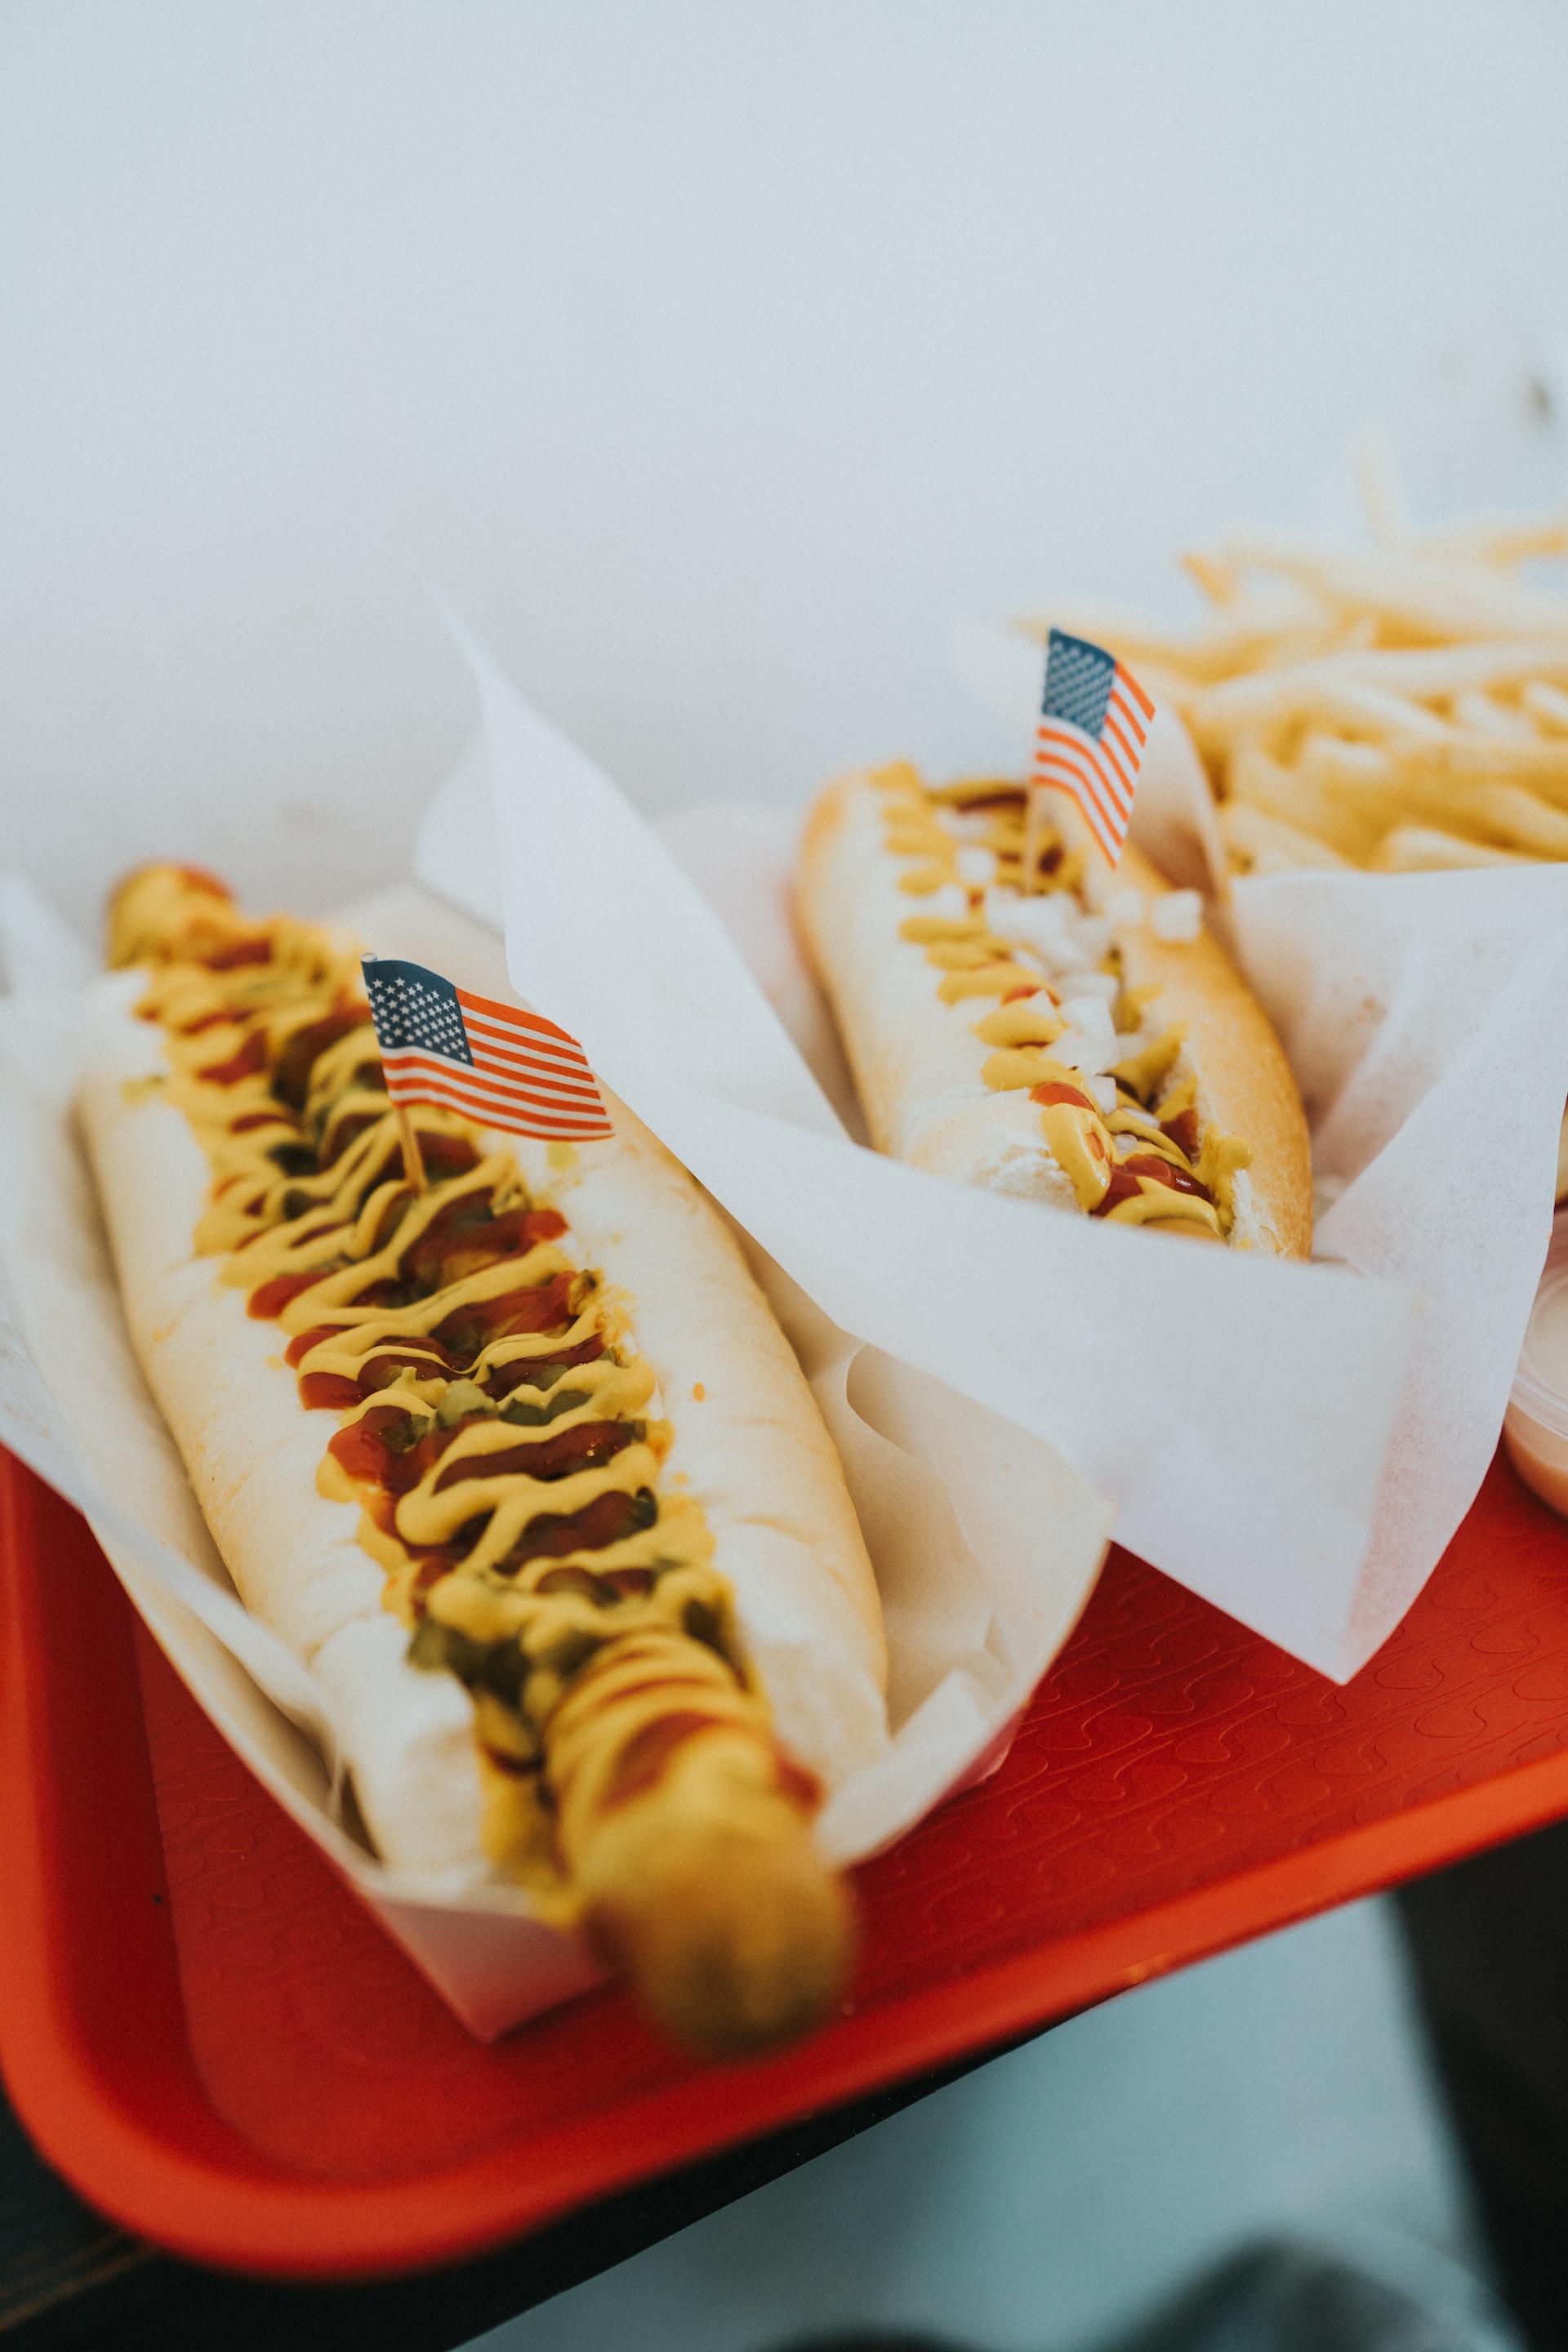 A photograph of a red tray with two long hotdogs, covered in ketchup and yellow mustard, with tiny American Flags stuck into them.